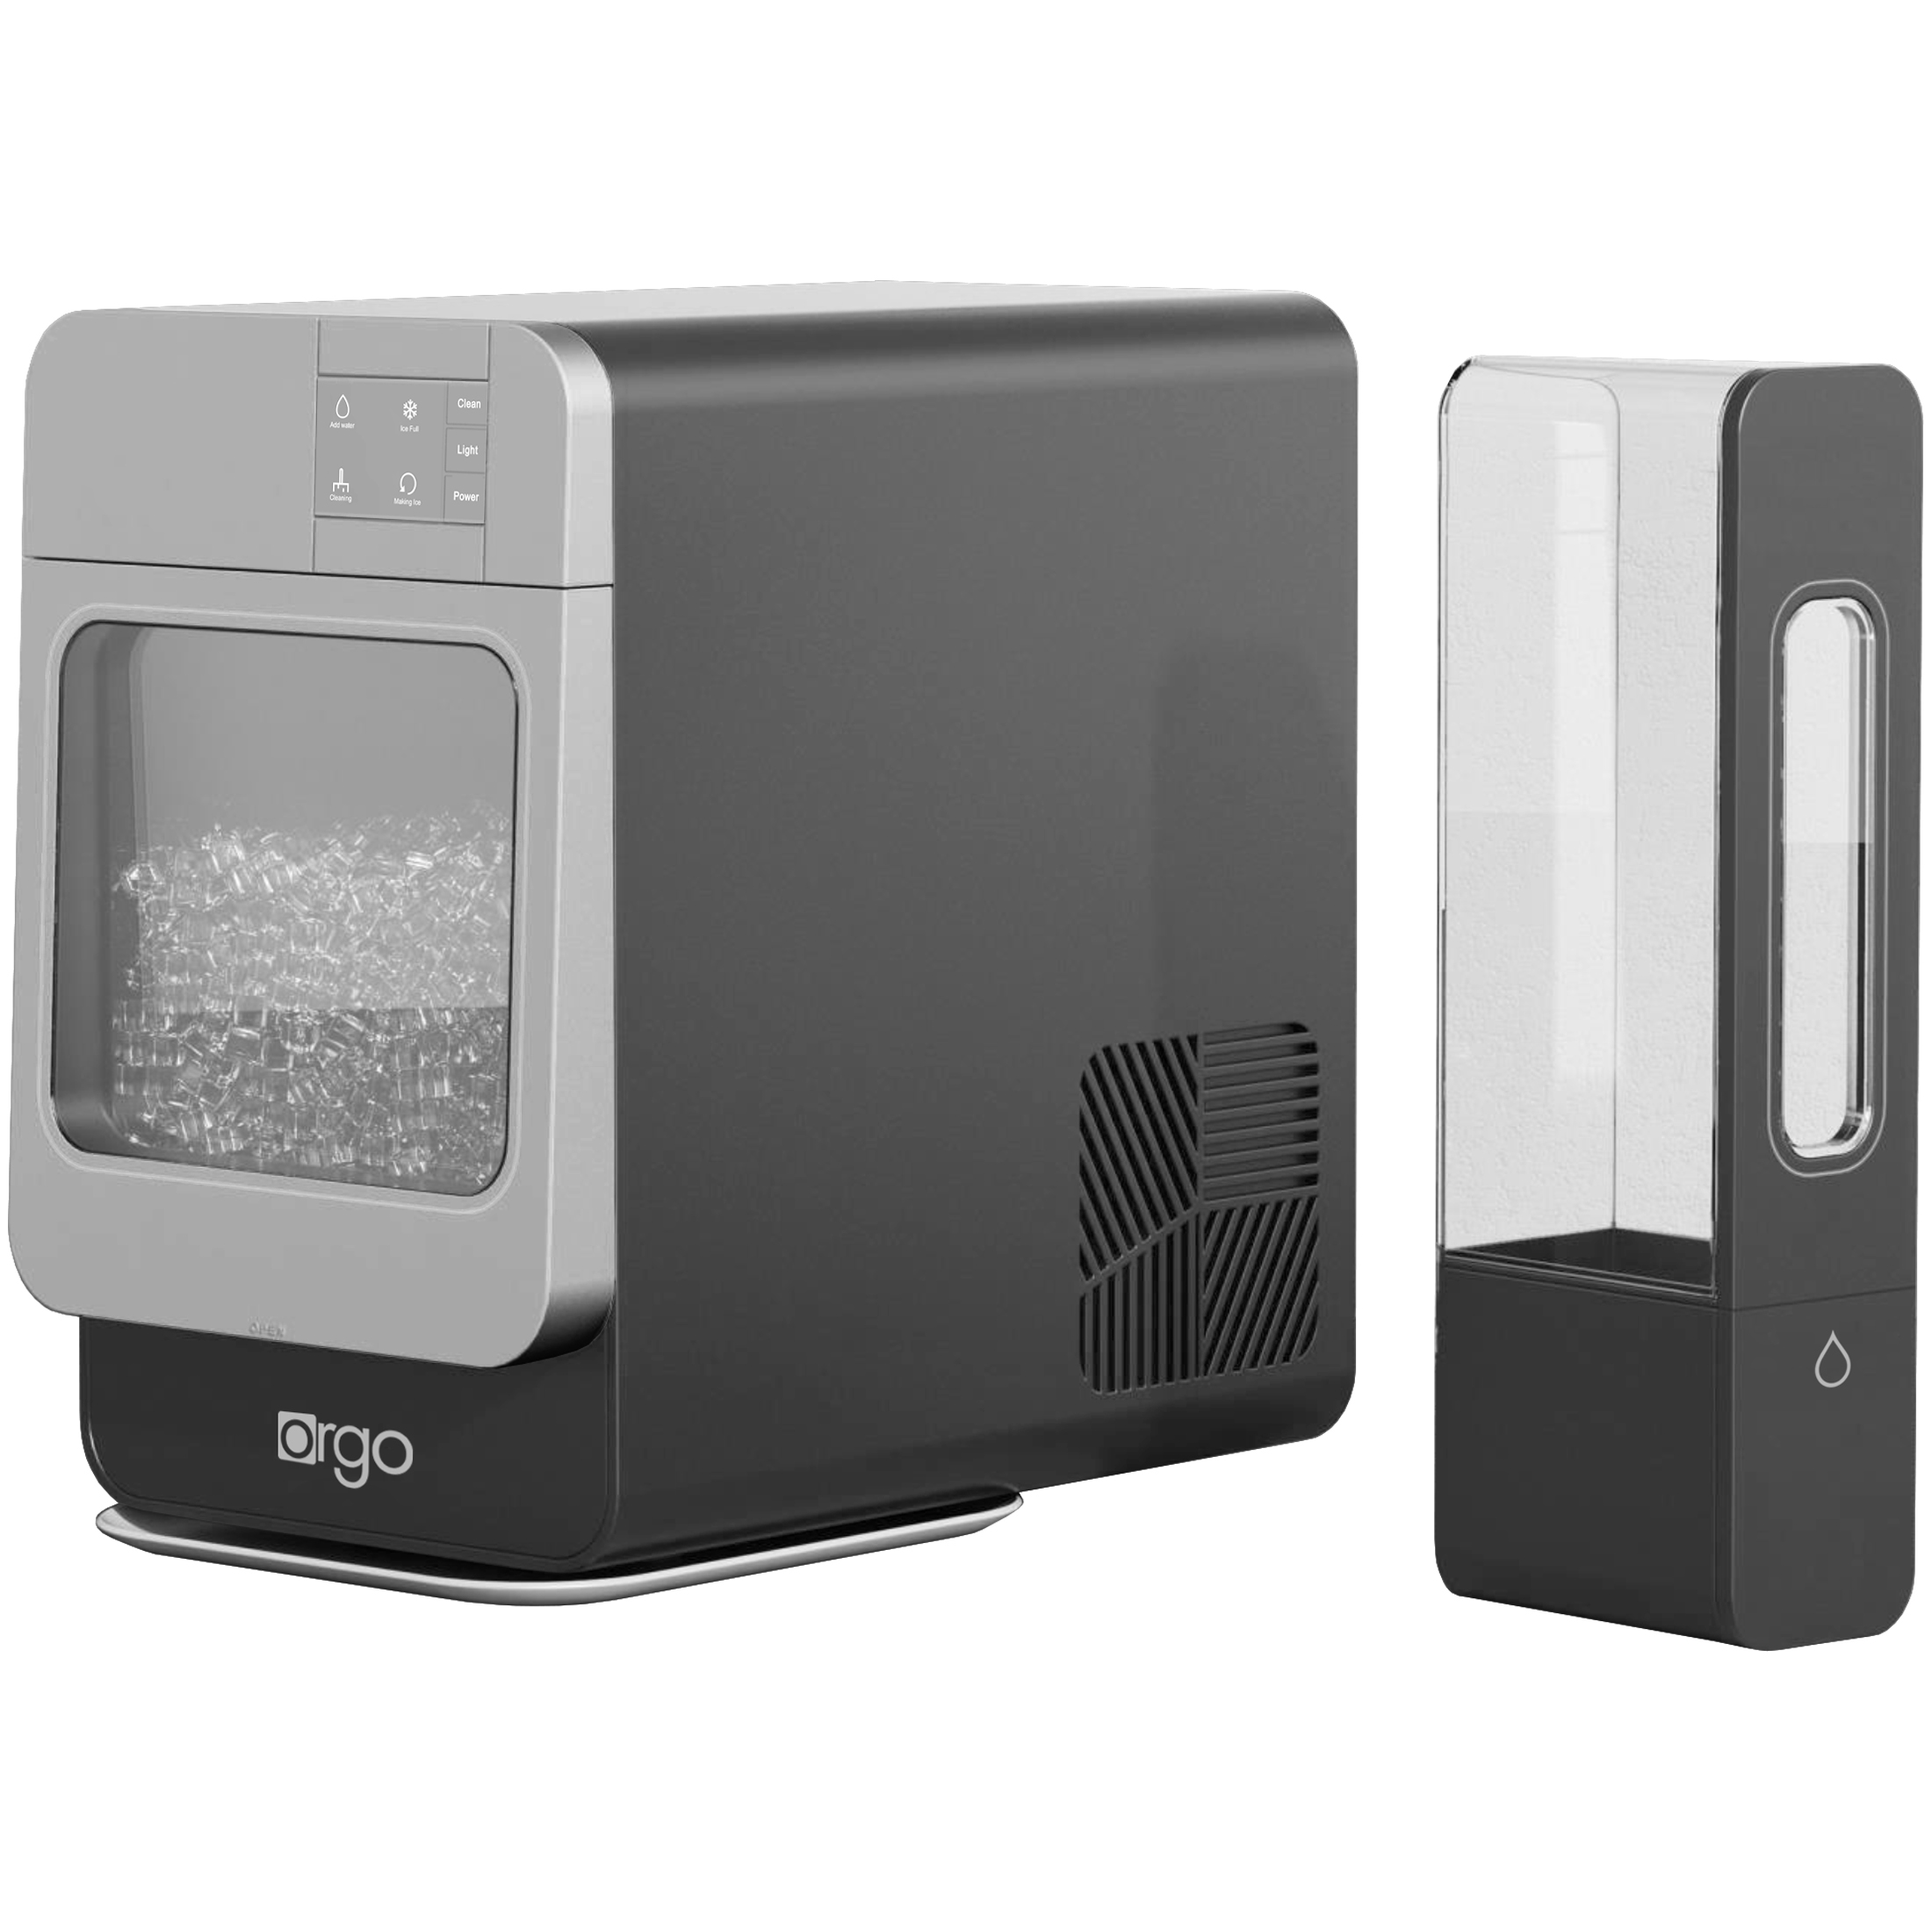 Orgo Products The Sonic Countertop Ice Maker, Nugget Ice Types, Charcoal - image 3 of 9